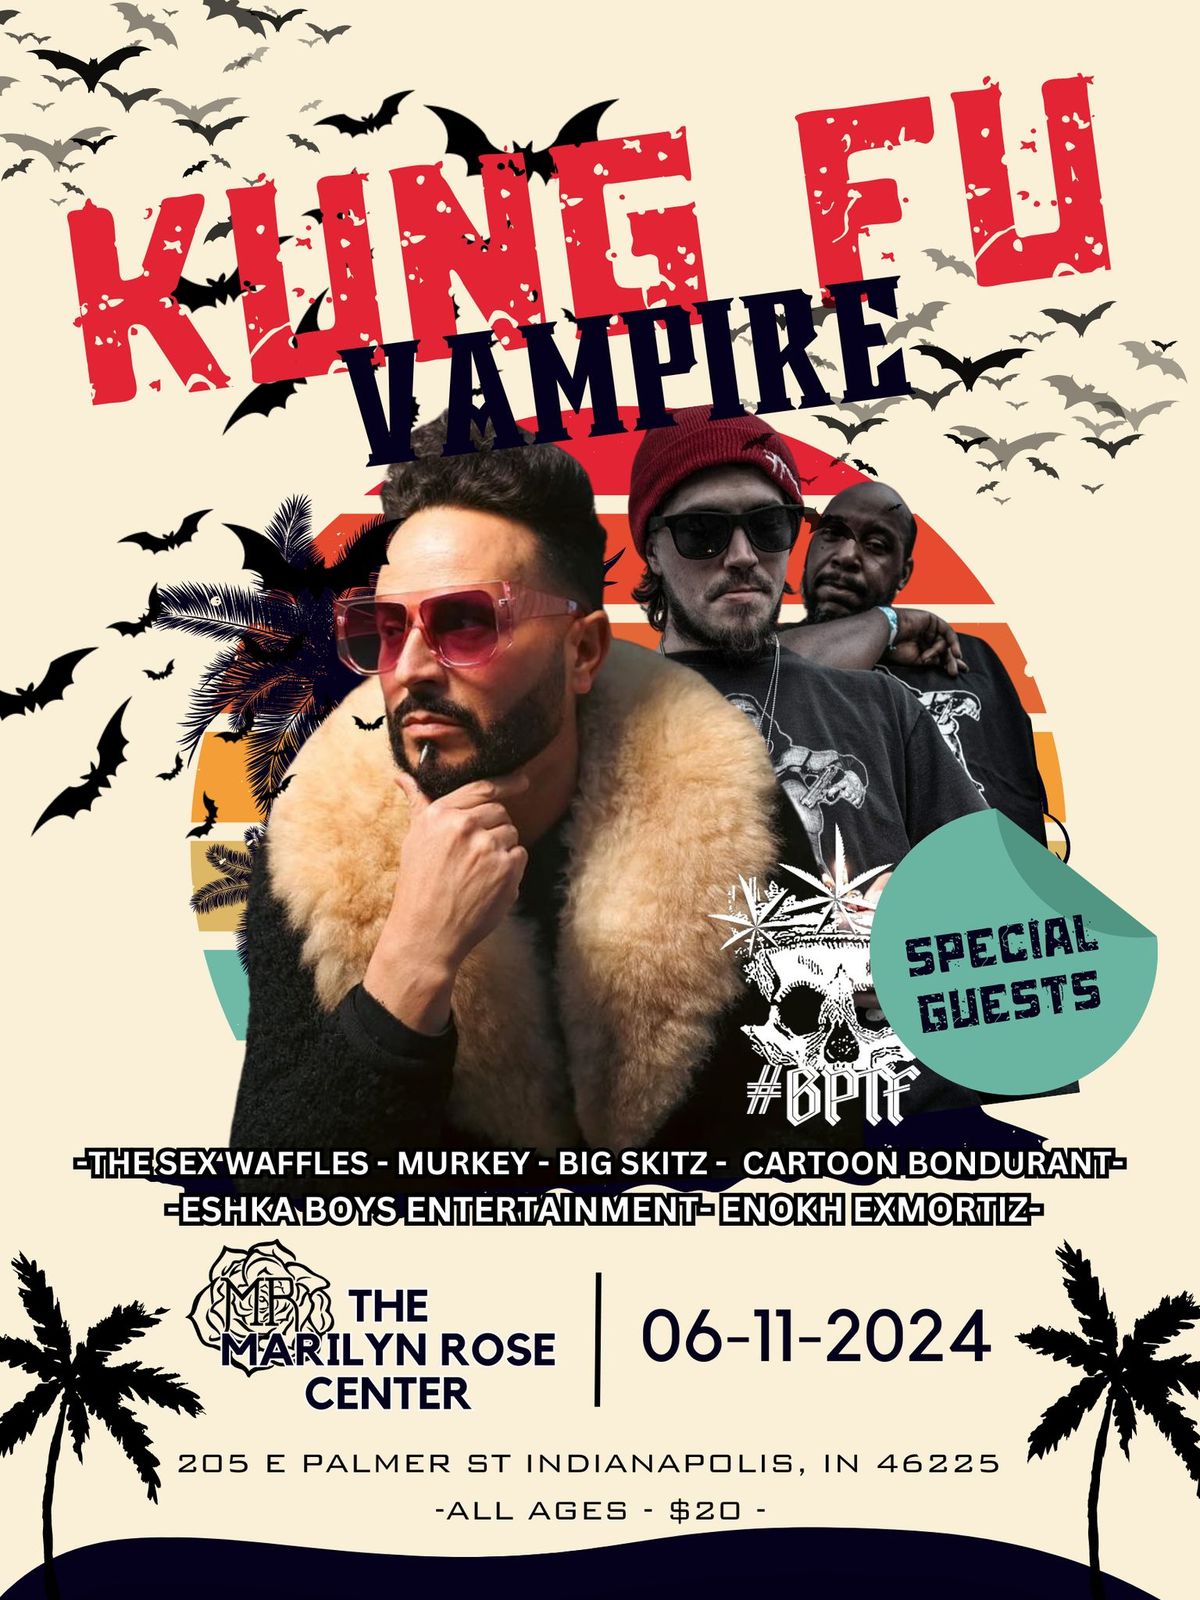 KUNG FU VAMPIRE LIVE AT THE MARILYN ROSE CENTER w\/ Special Guests #BPTF and more!